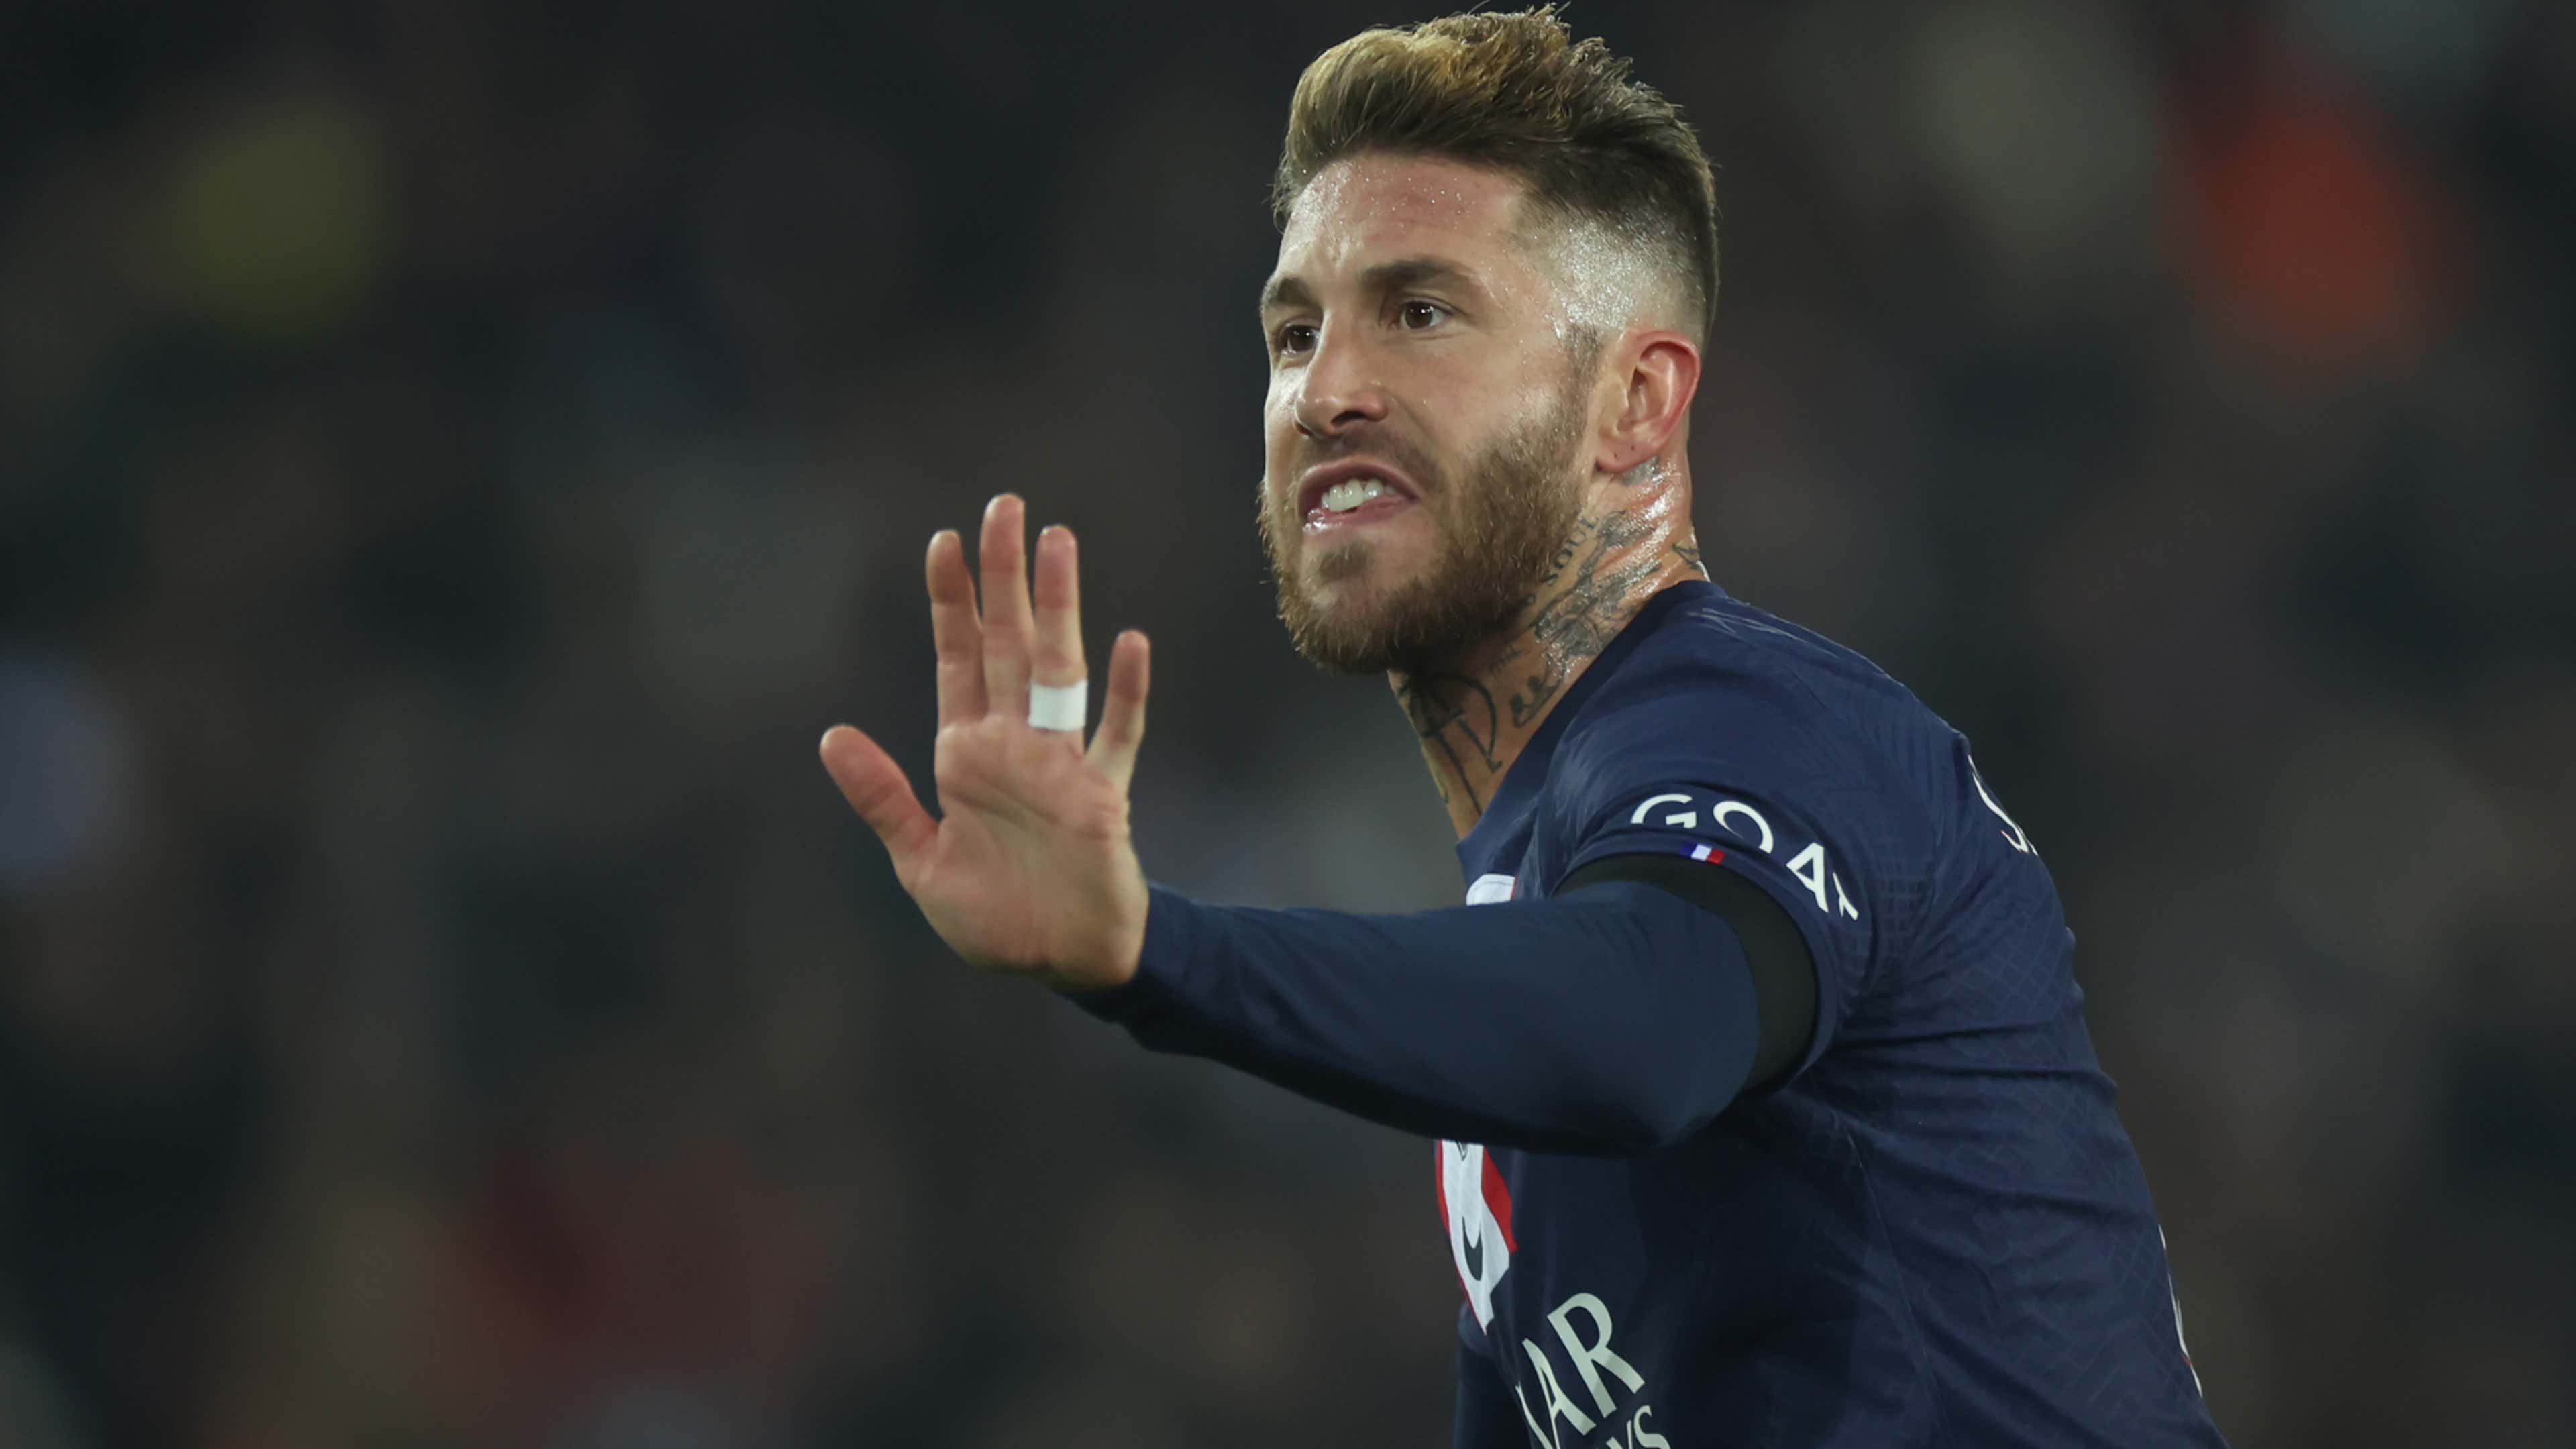 Sergio Ramos faces Real Madrid for first time since Sevilla return,  Barcelona hosts Bilbao